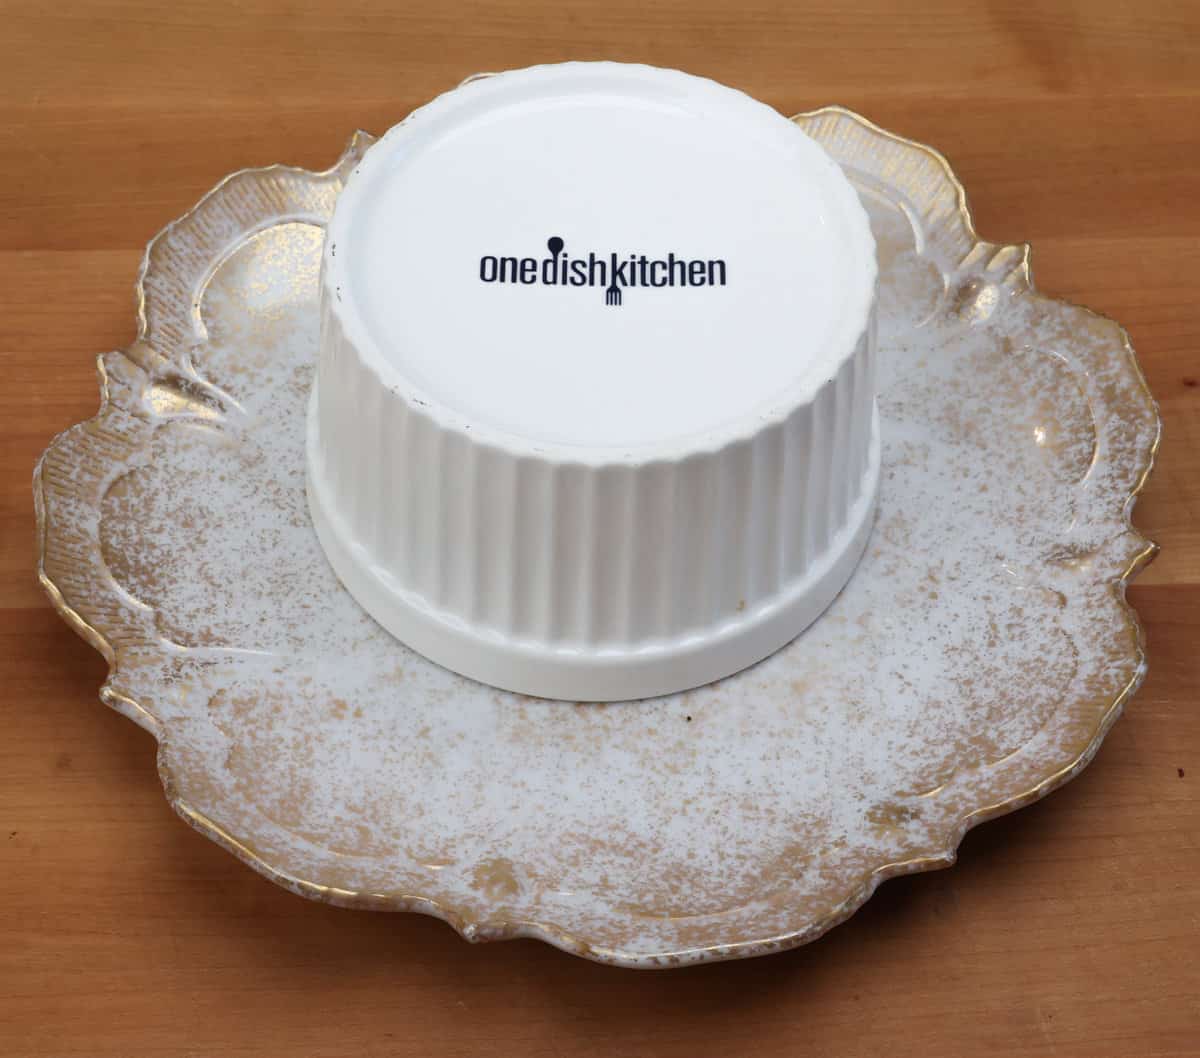 a ramekin inverted on a plate waiting for its release from the ramekin.